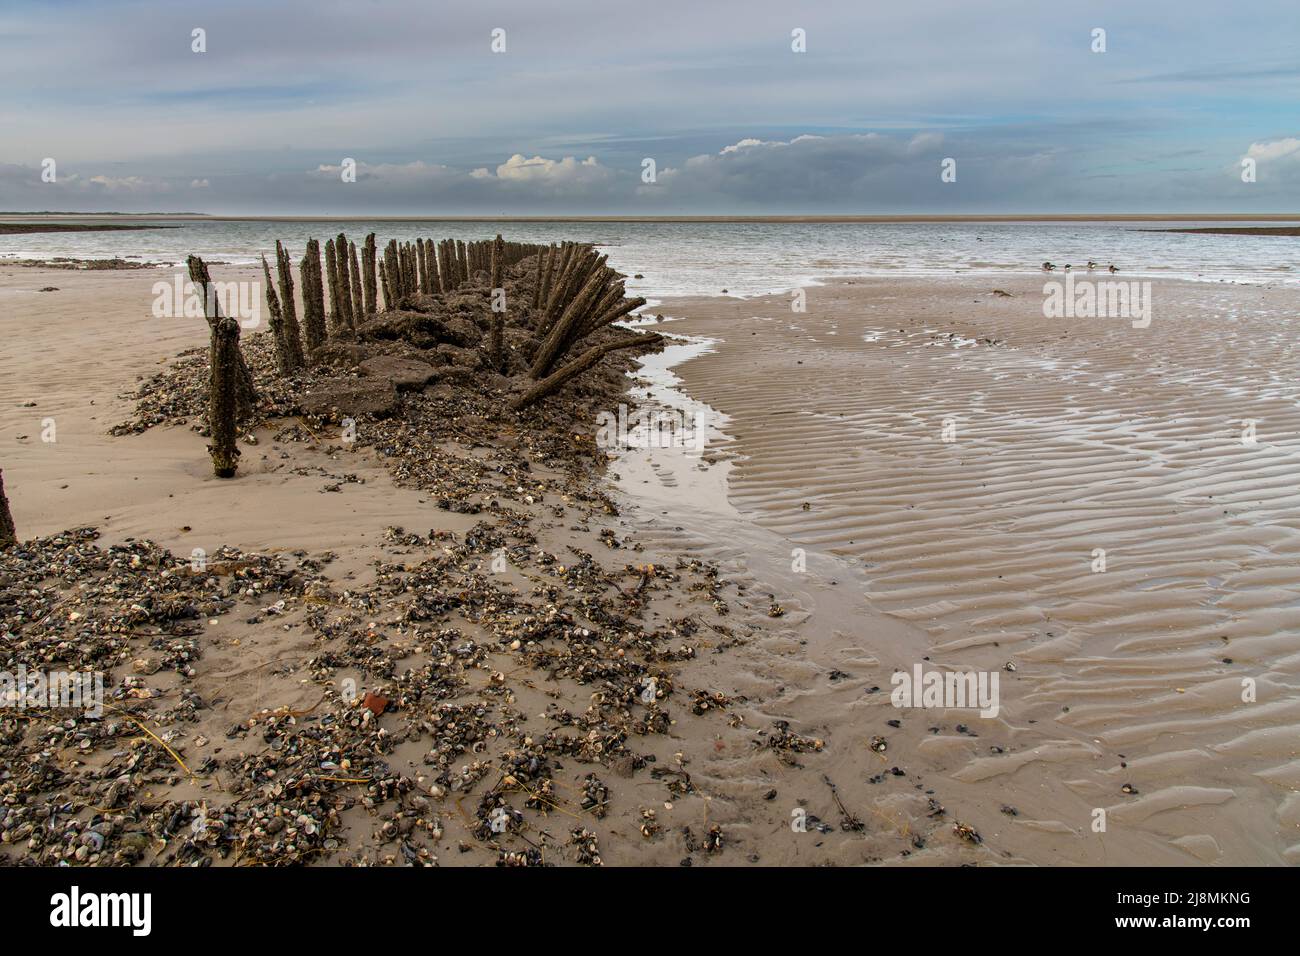 wooden poles on the beach at north sea Stock Photo